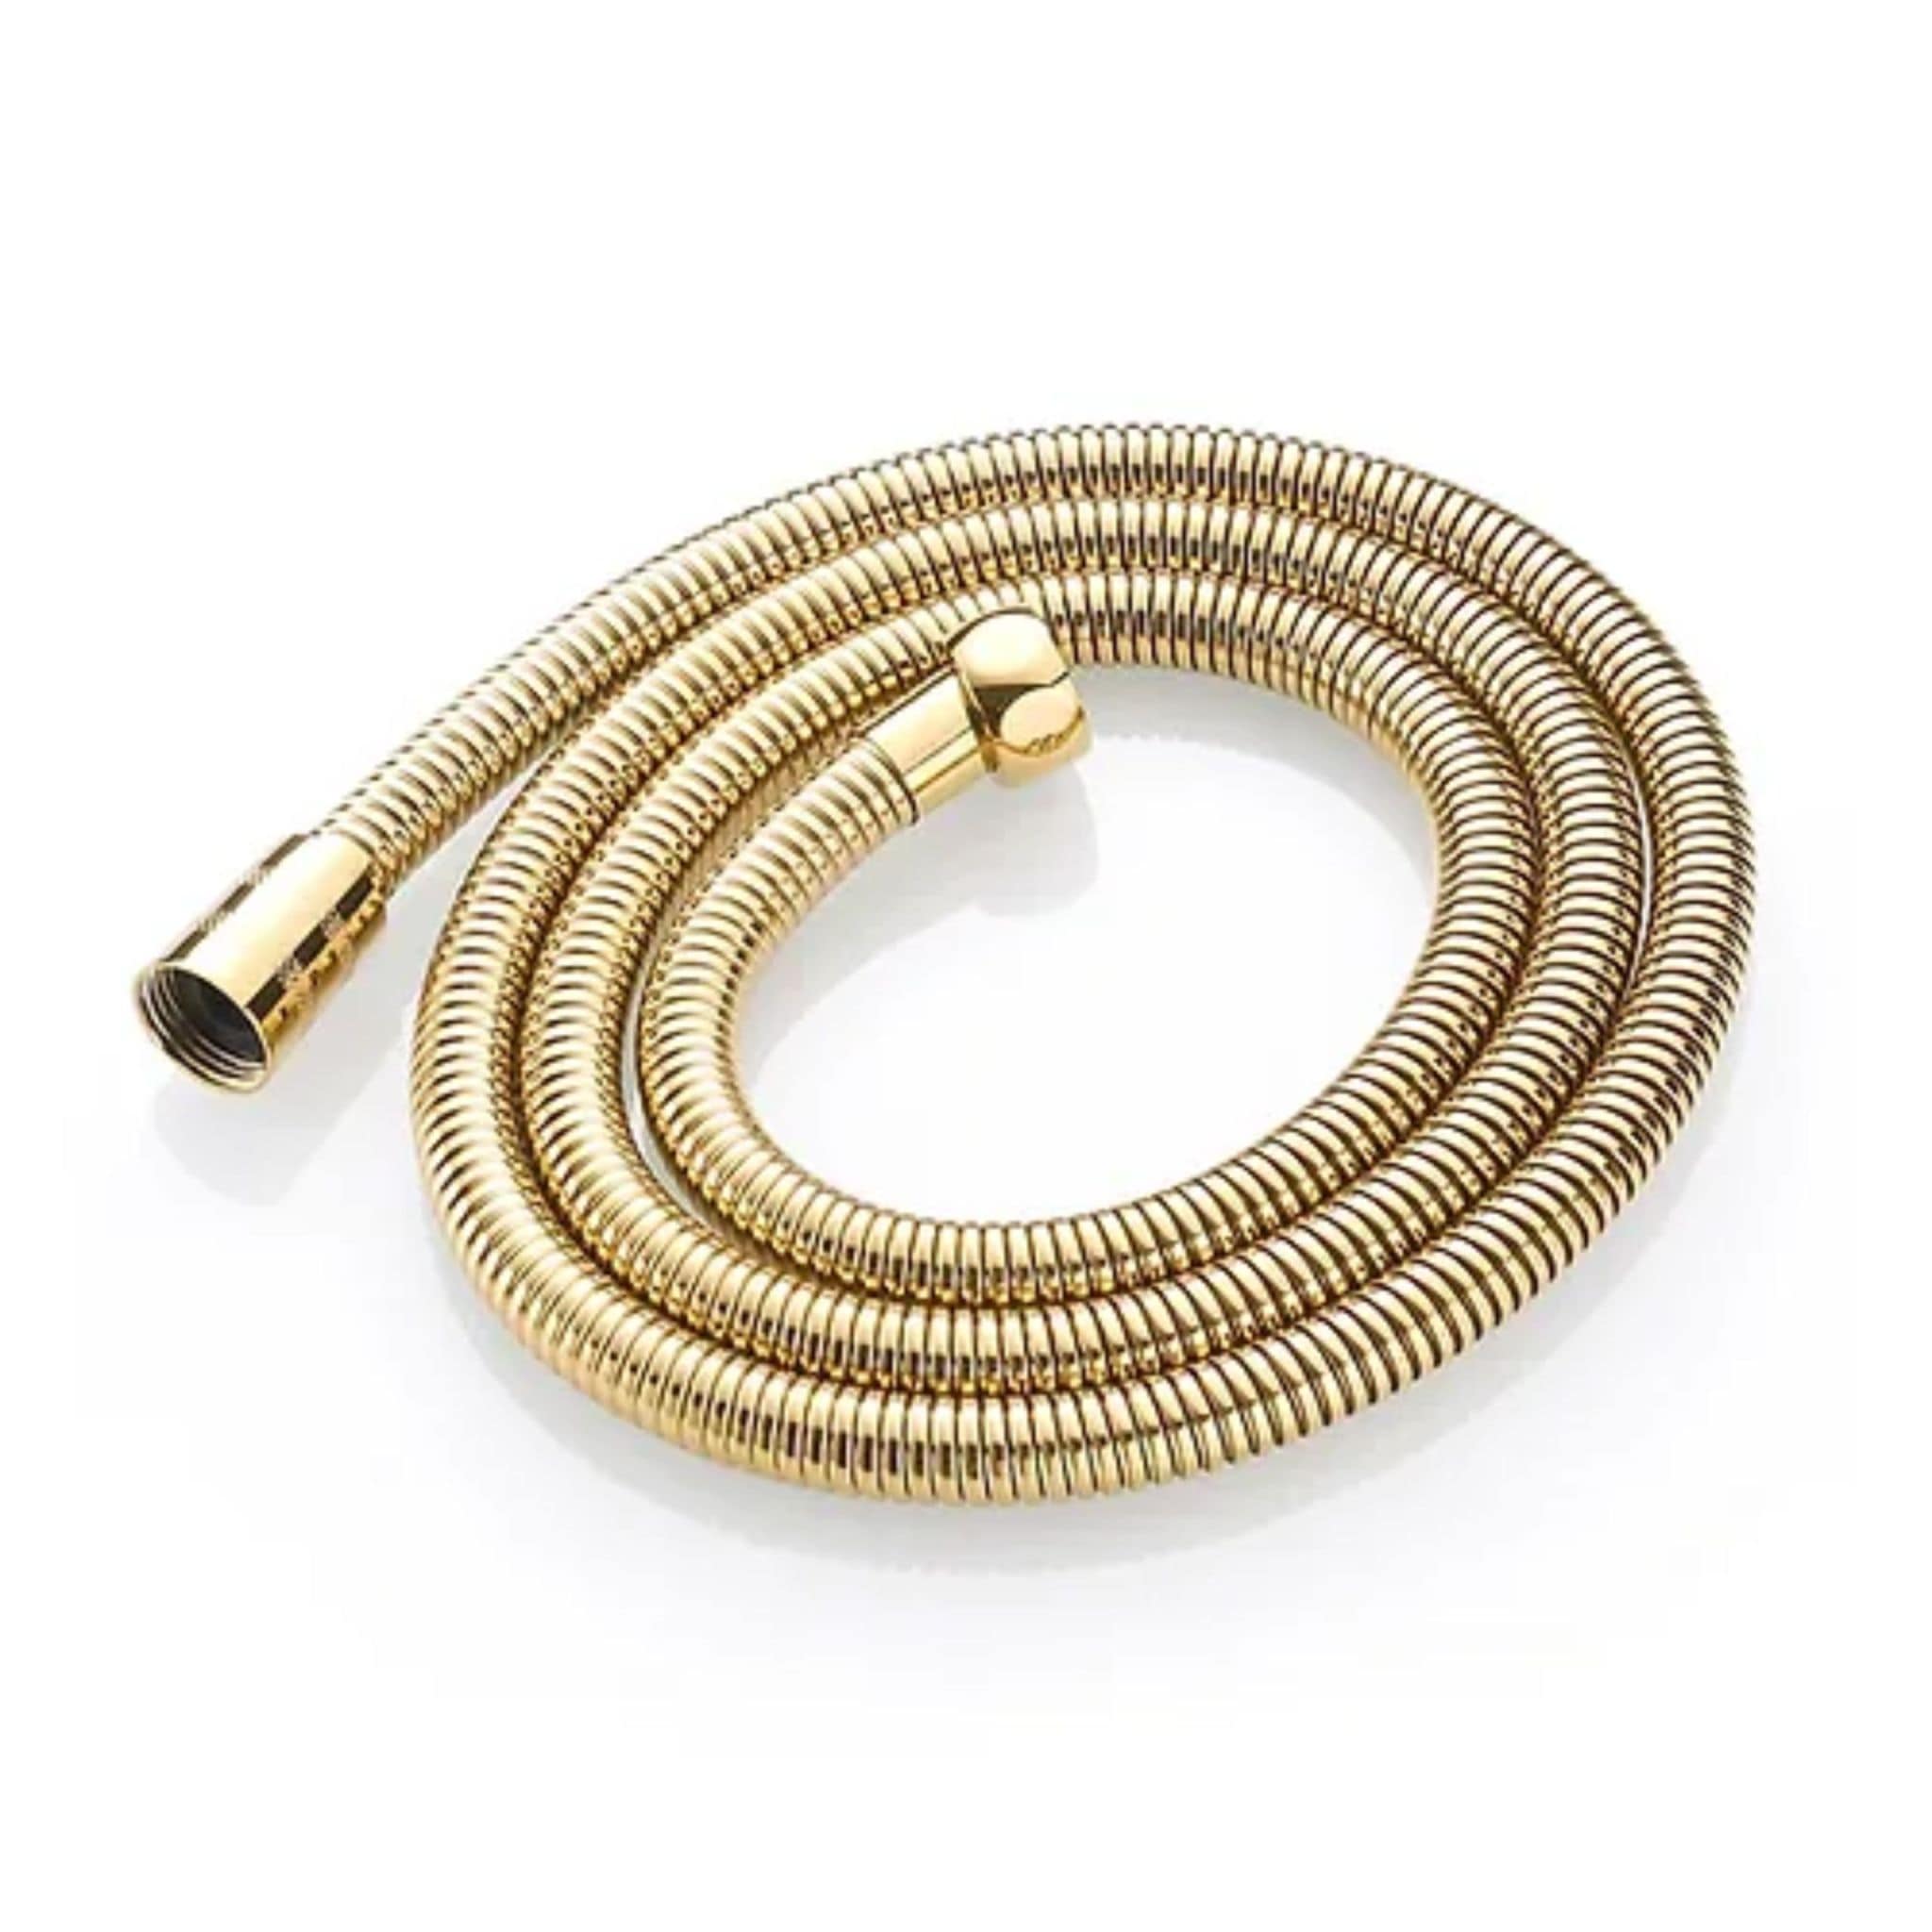 OE Isis 1.5M Gold Stainless Steel Hand Shower Flexi Pipe – Elegant and Durable